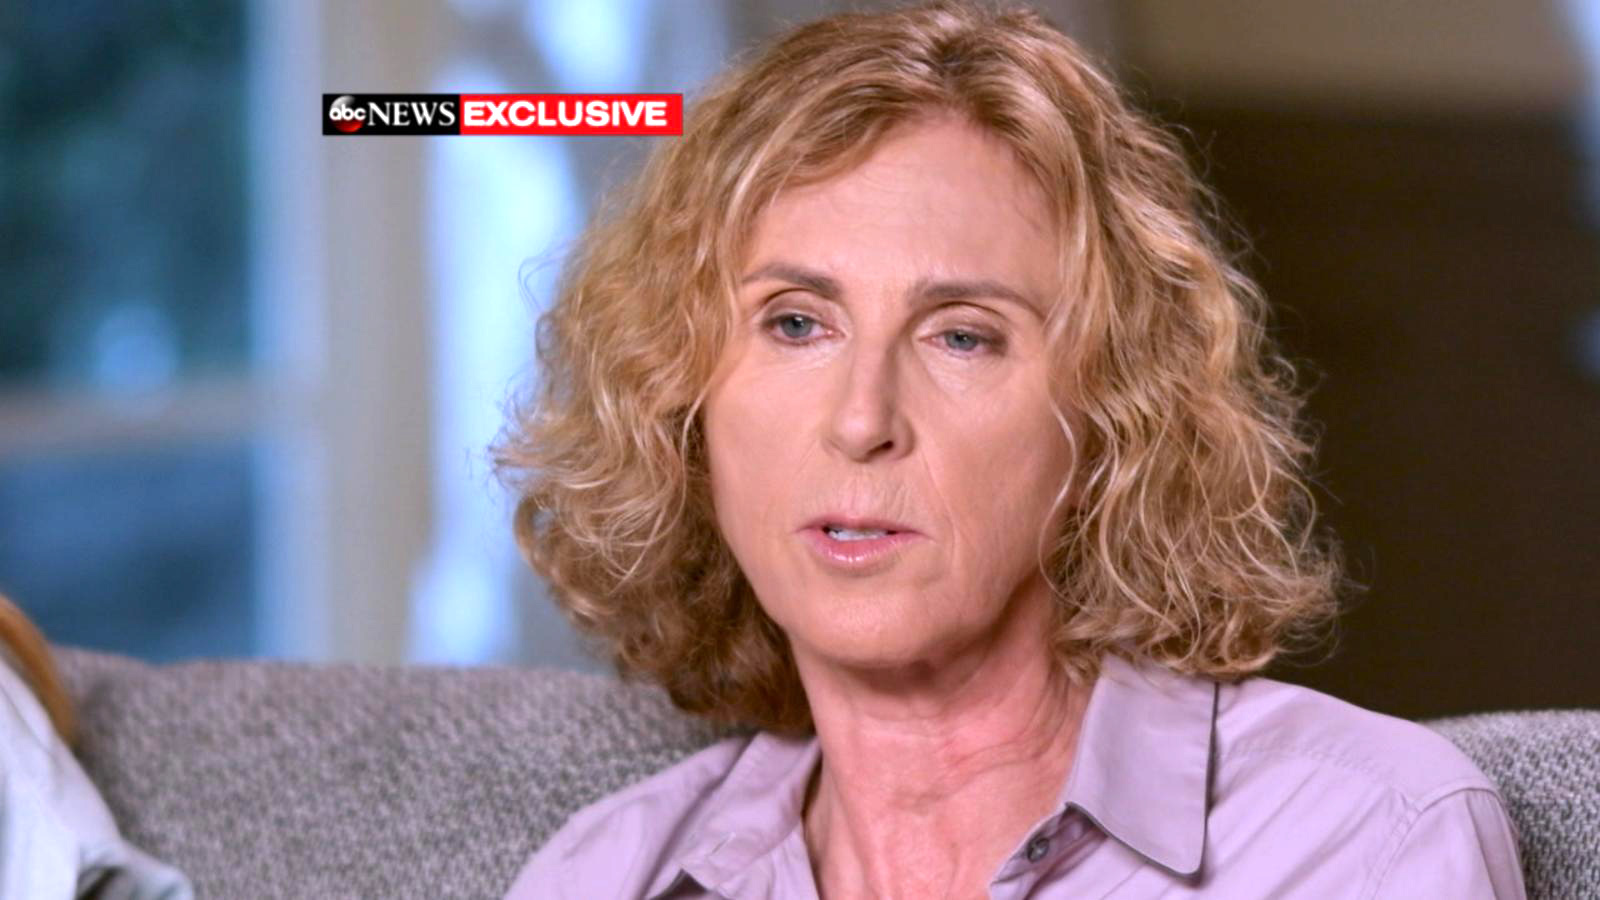 PHOTO: Dana Loewy alleges that former USC gynecologist Dr. George Tyndall sexually harassed her. 